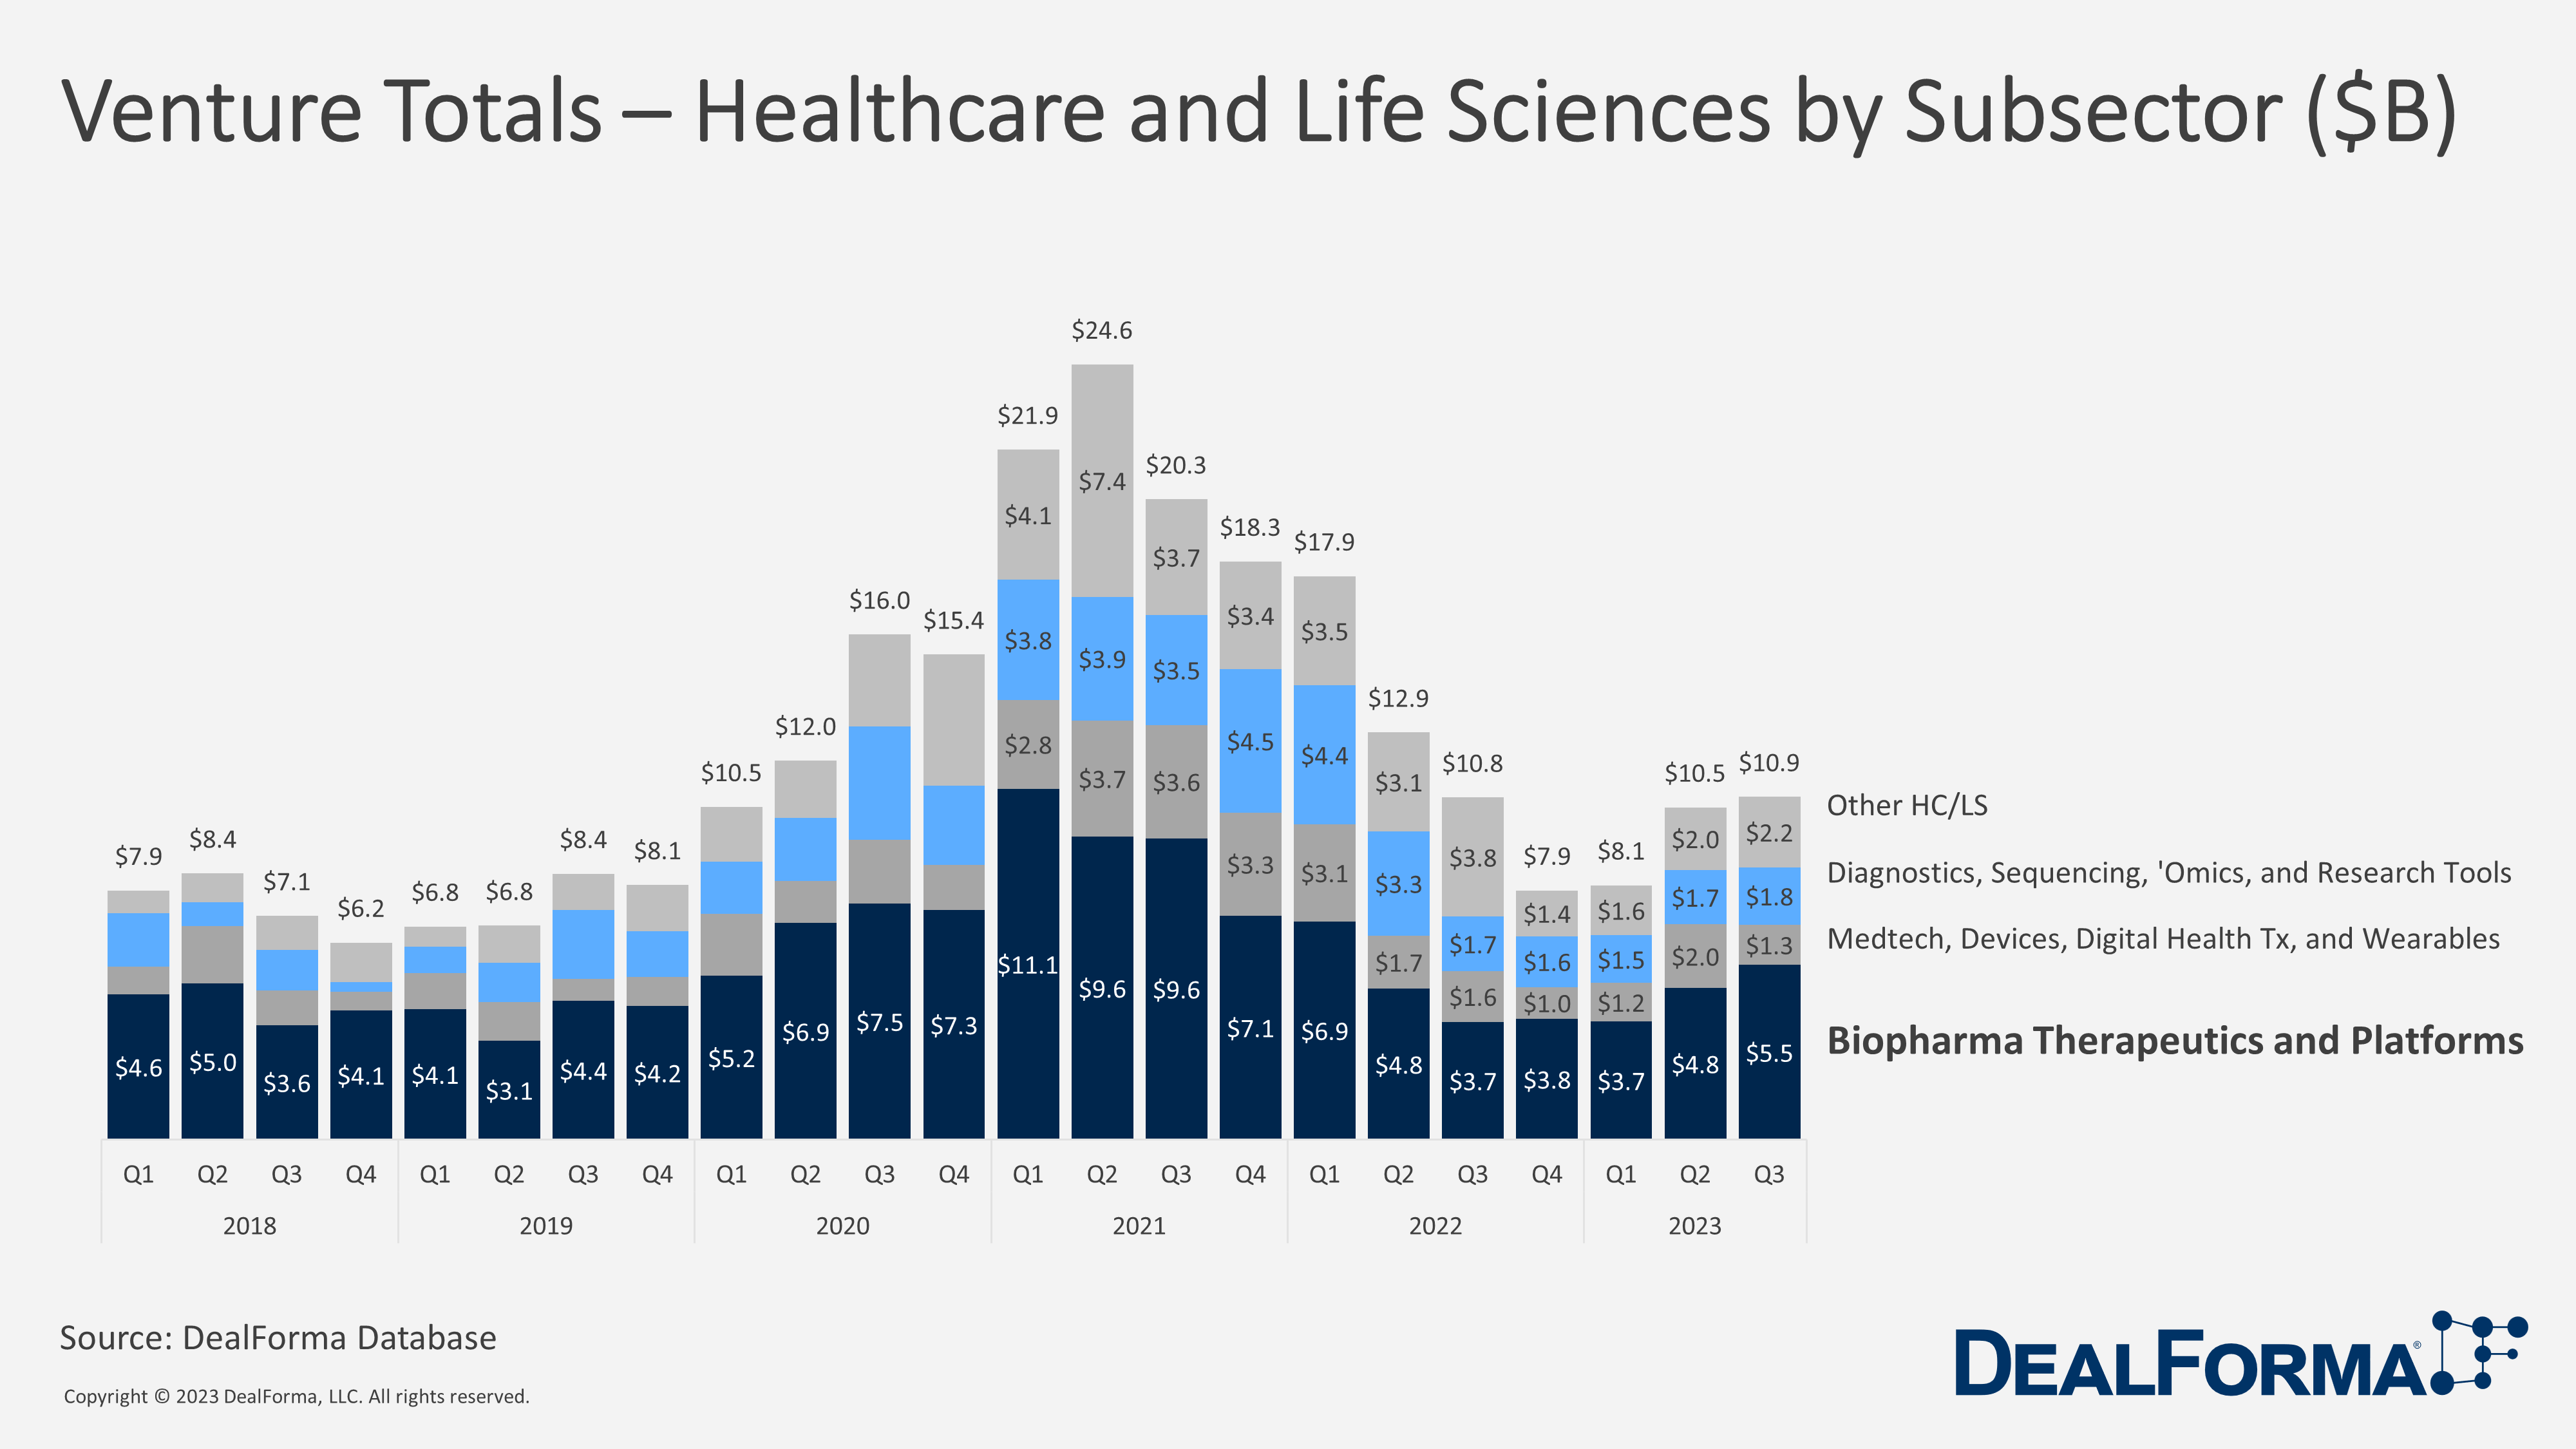 Venture Totals - Healthcare and Life Sciences by Subsector ($B) - Biopharma Therapeutics & Platforms vs other life sciences - DealForma